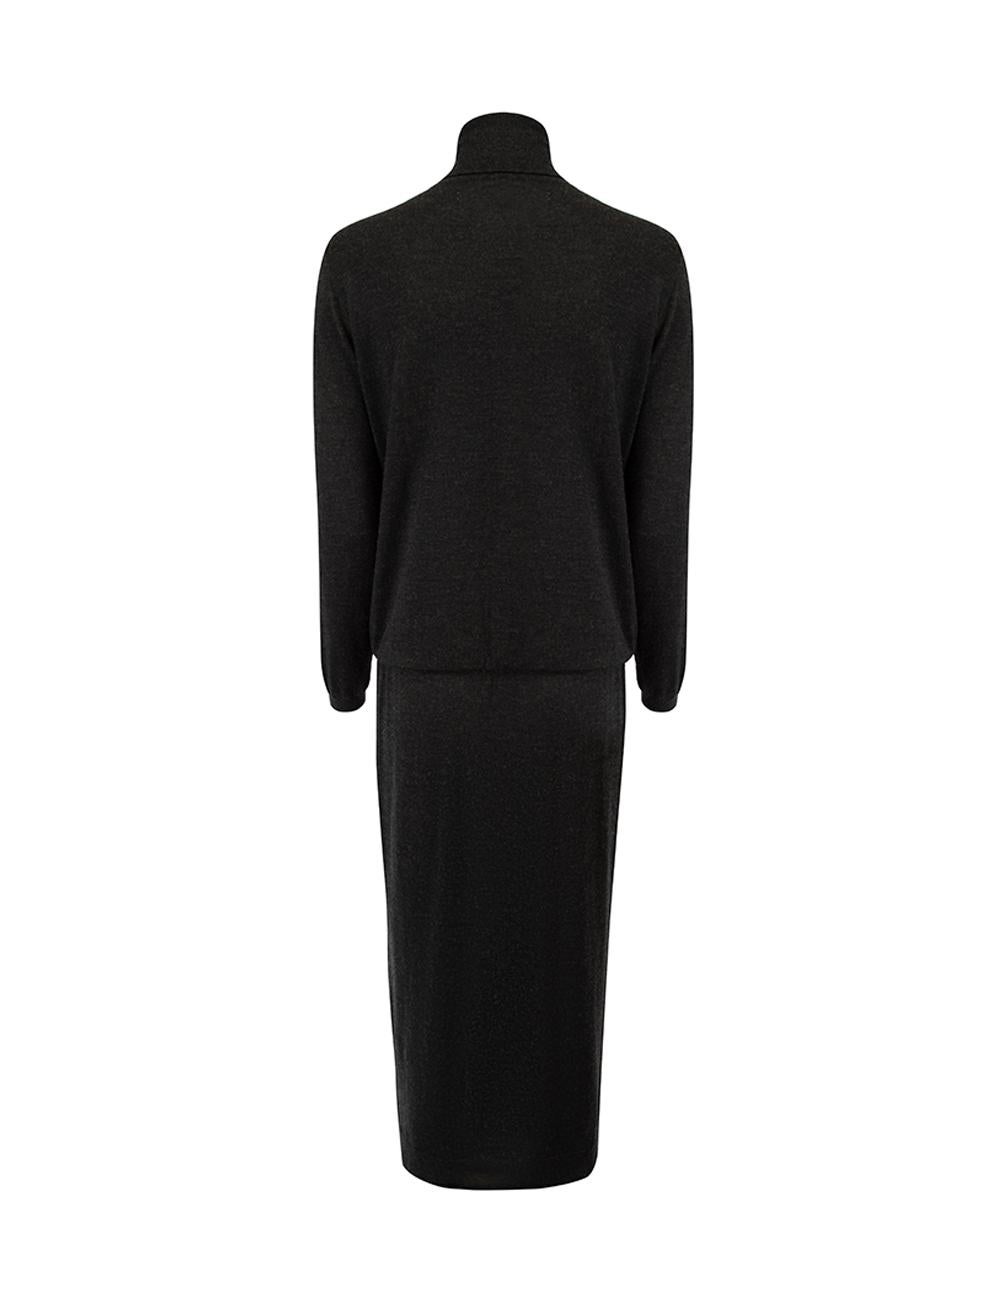 CONDITION is Very good. Minimal wear to dress is evident. Overall wear to the outer cashmere mix blend fabric on this used Brunello Cucinelli Cashmere designer resale item. Details Grey Cashmere Midi dress Long sleeves Turtleneck Front slit on skirt